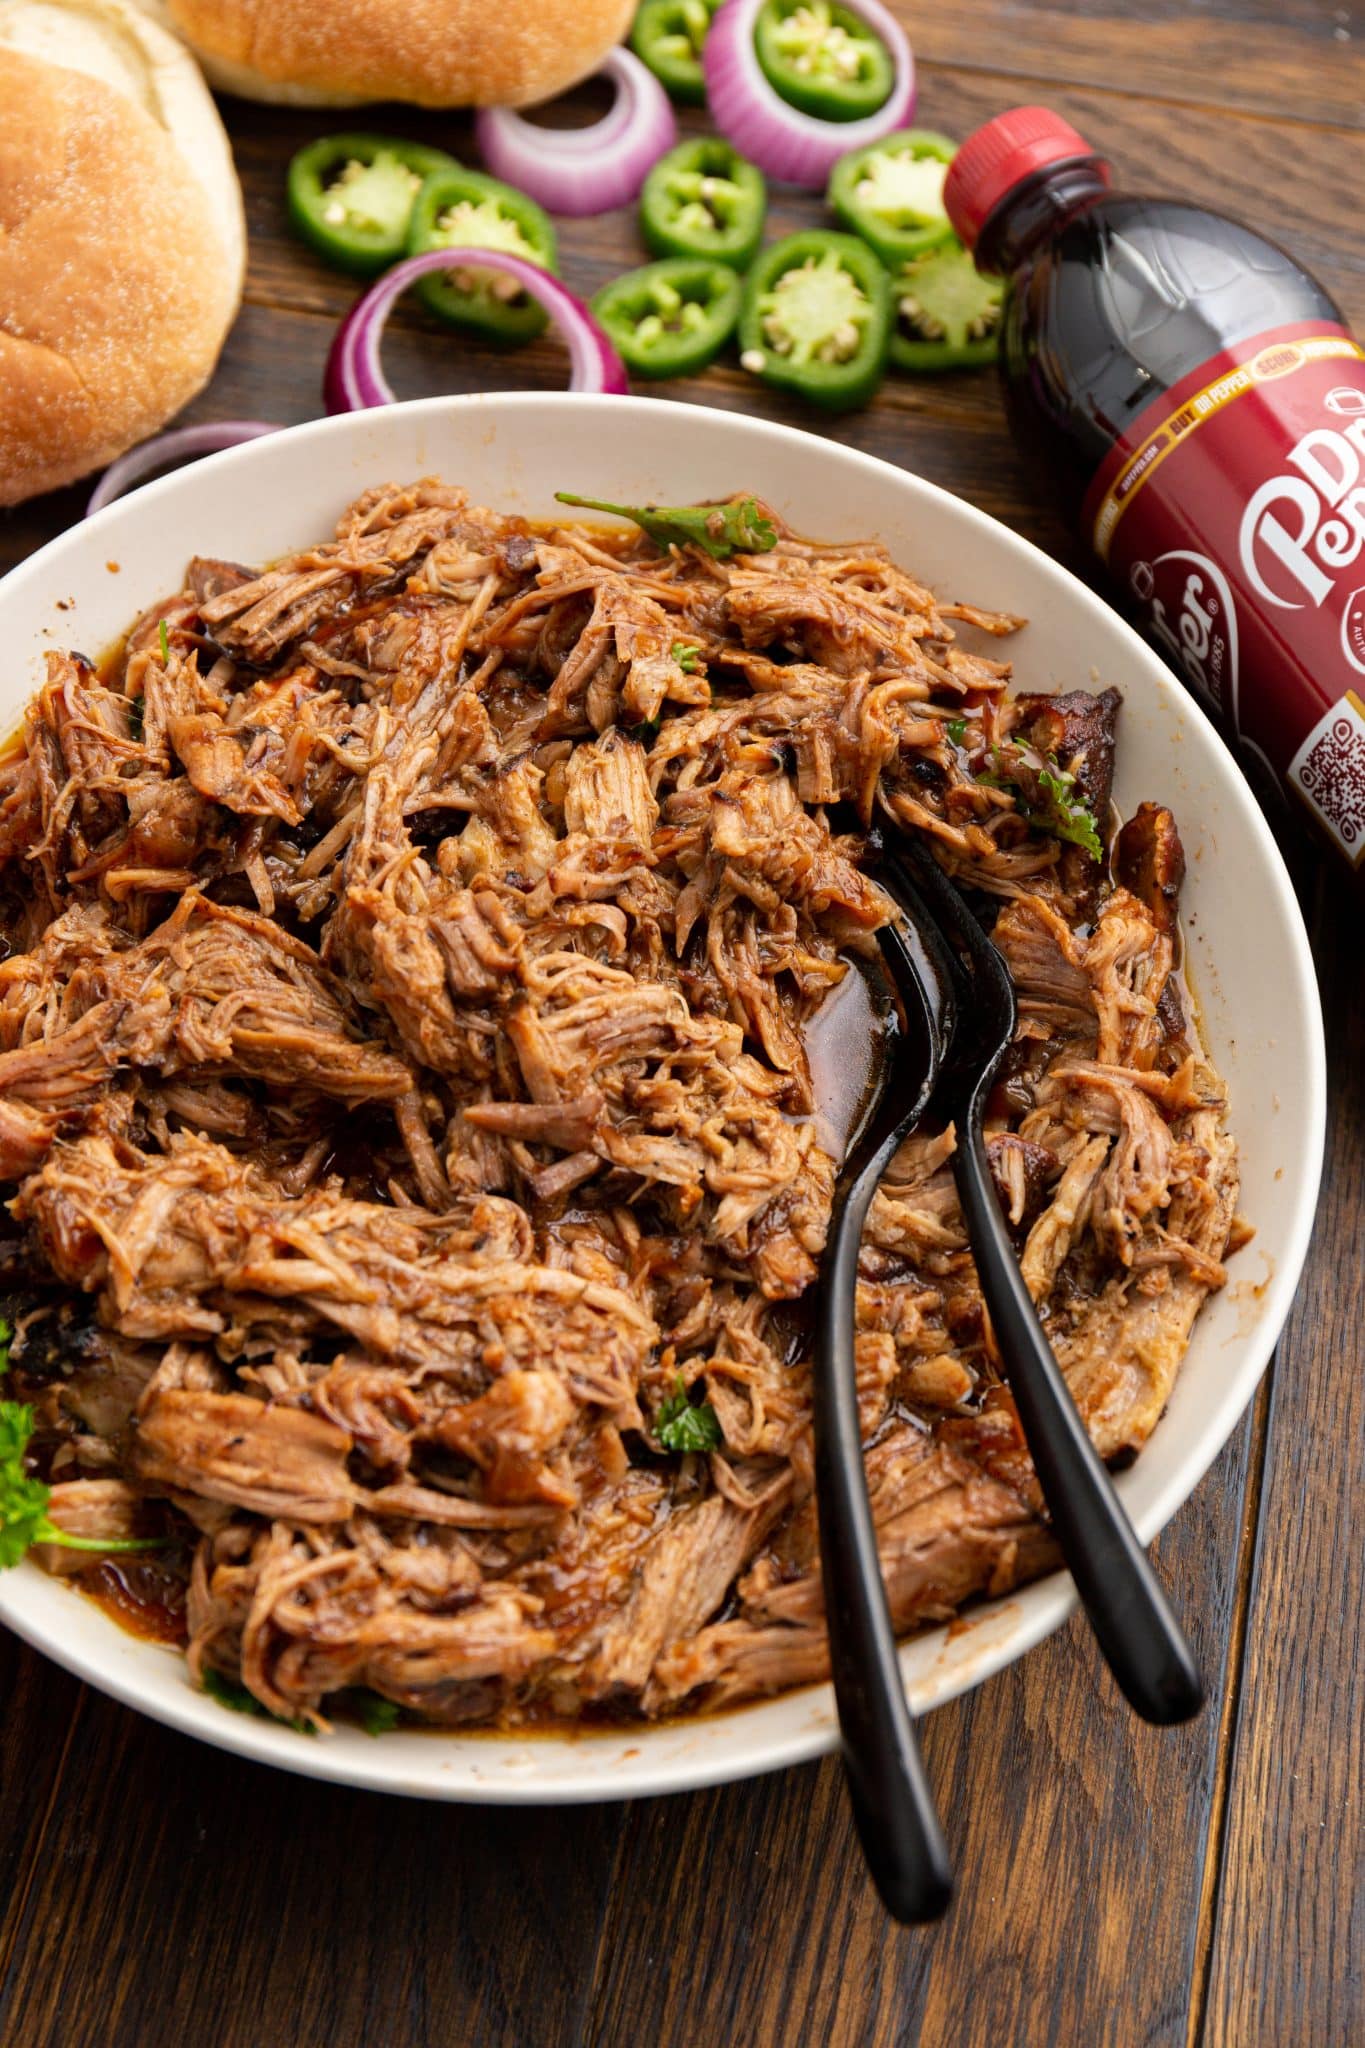 Shredded pulled pork in a bowl next to a bottle of Dr Pepper